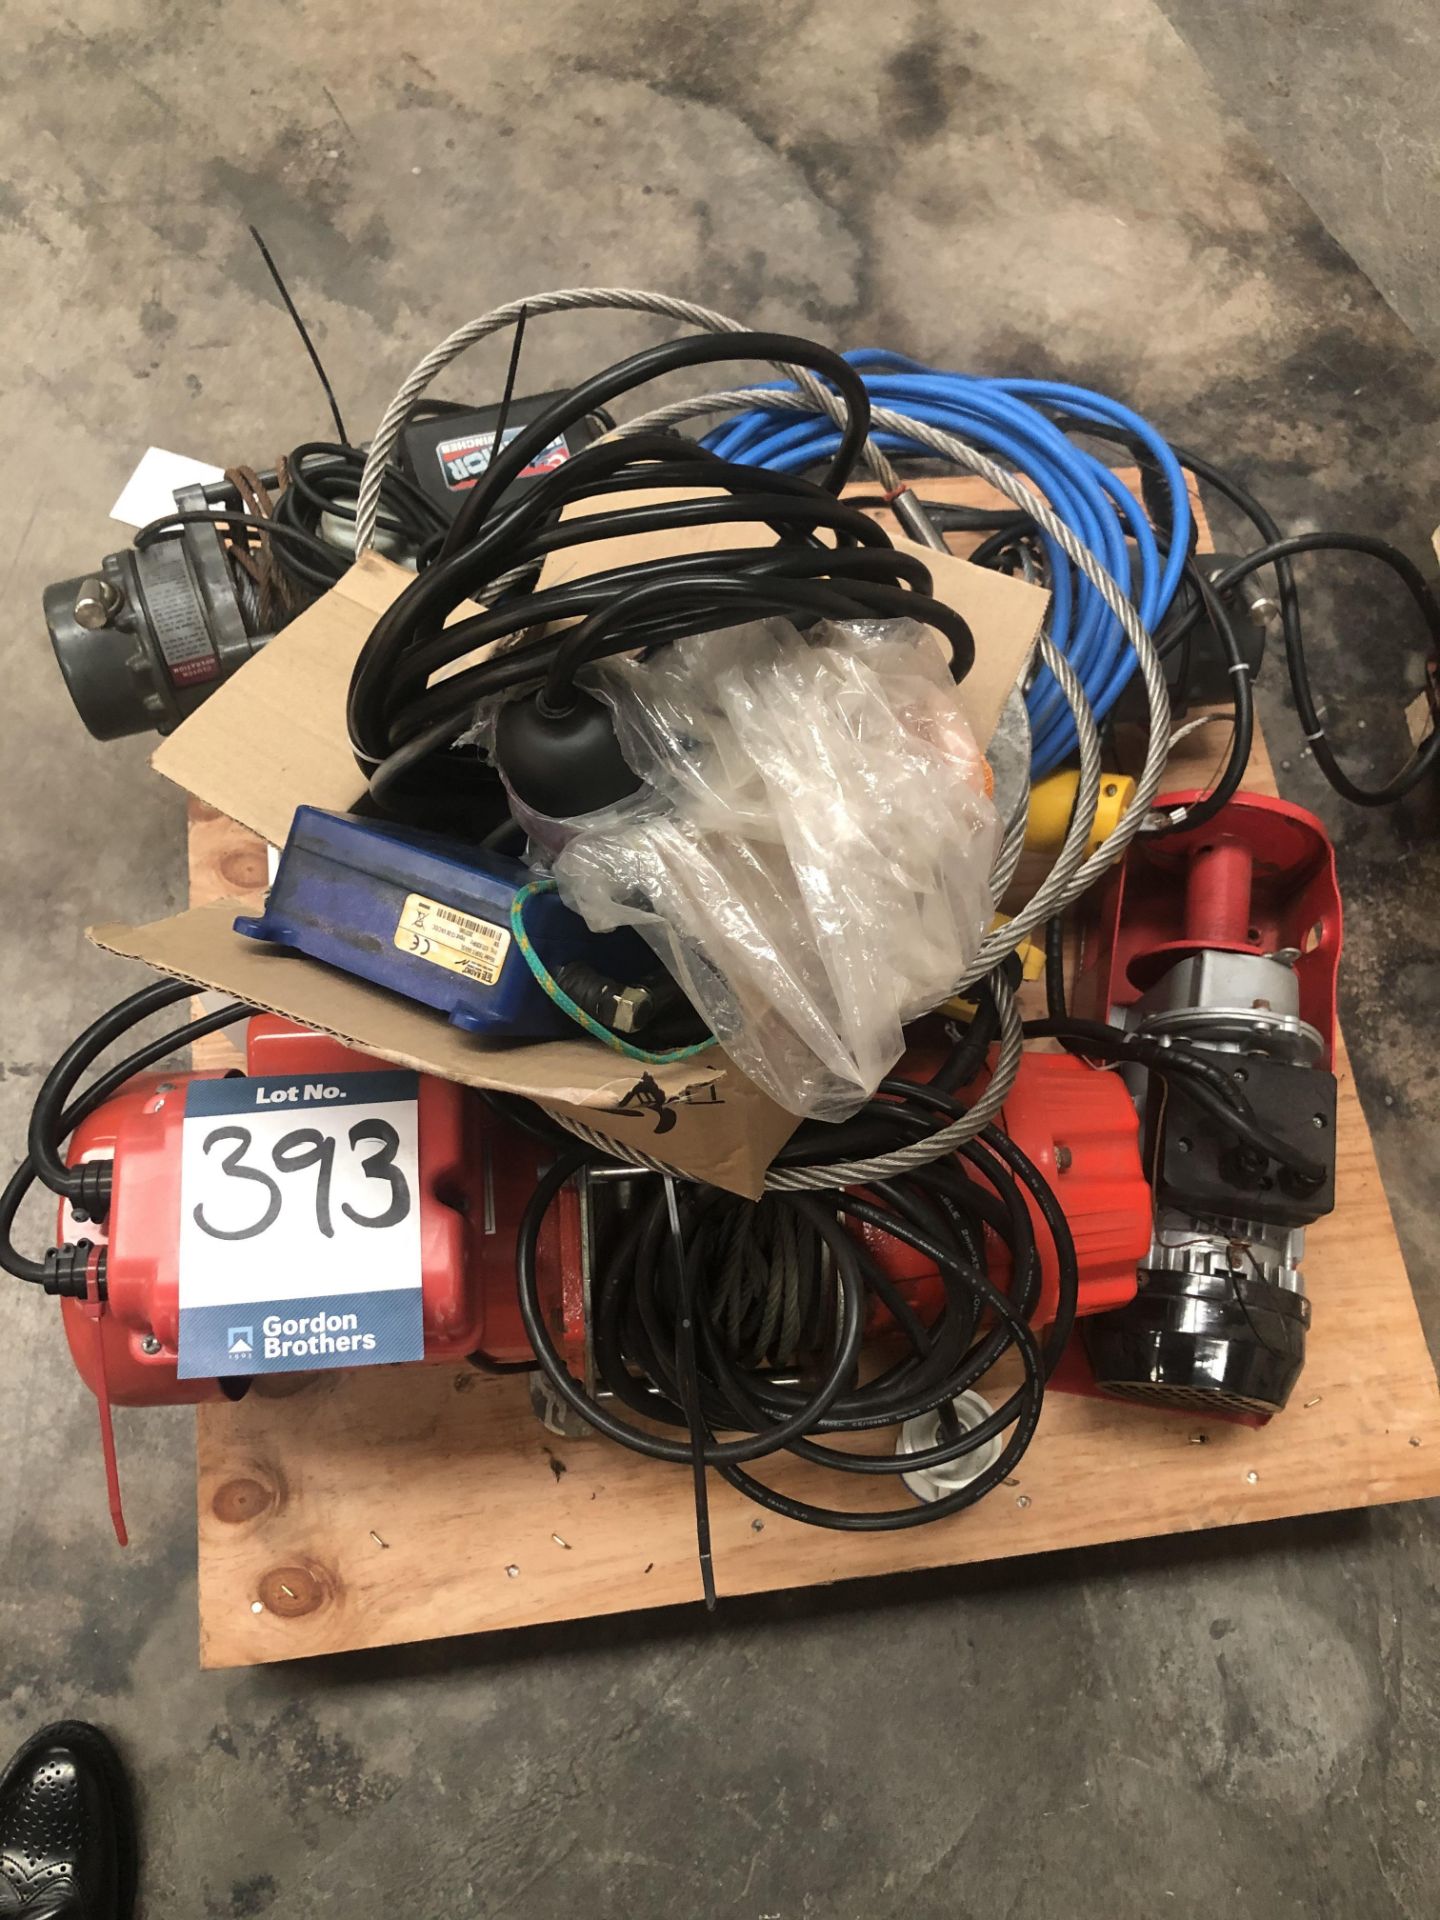 Comeup CP250 electric wire rope winch - load 250kg Serial No. 502535, Warrior C4500EWX 12 v wire